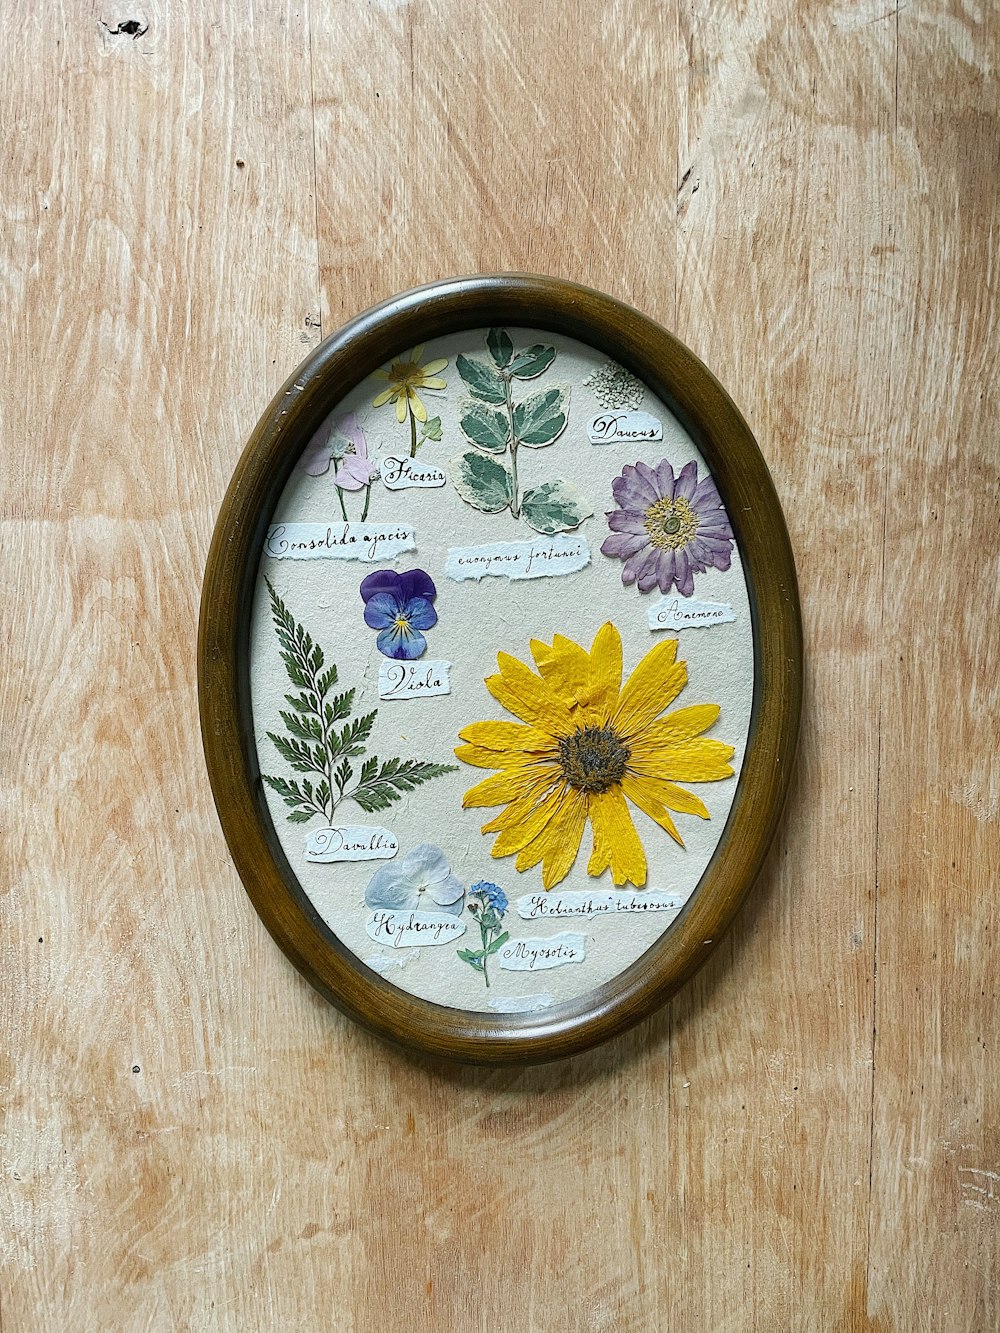 a picture of a flower on a wooden surface